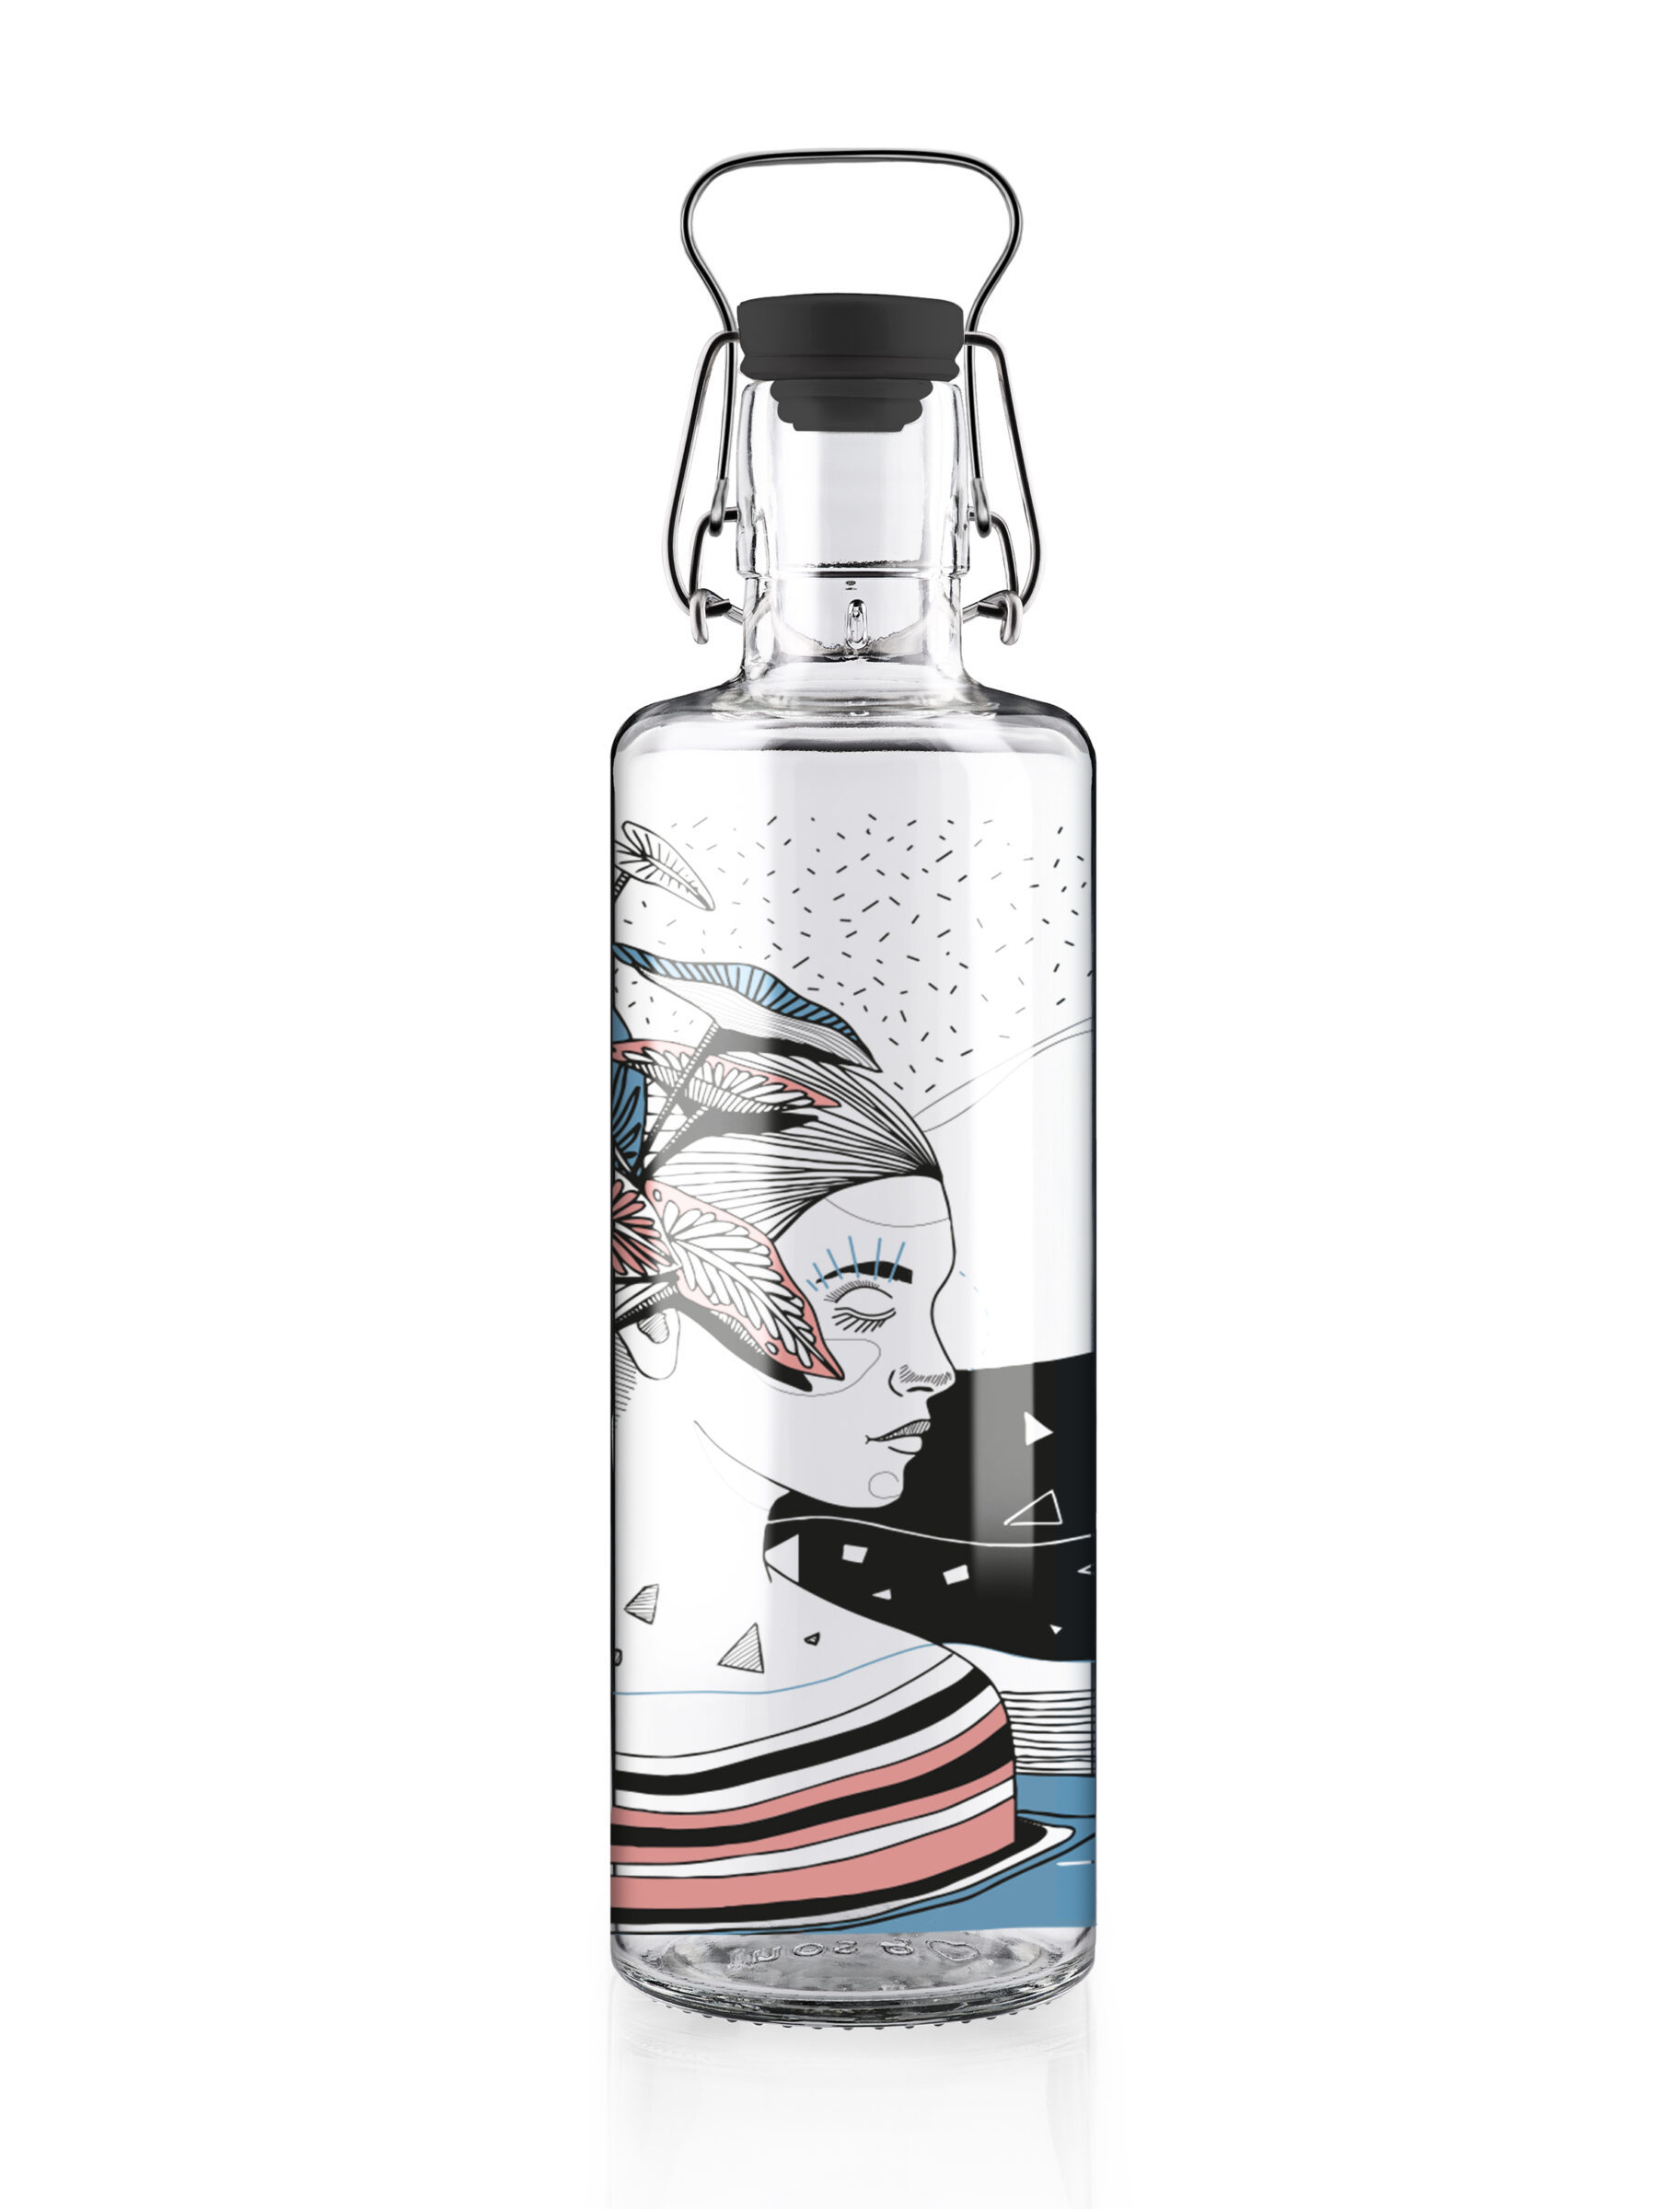 soulbottle-1l-nepal-collection-spirit-of-nature-tg